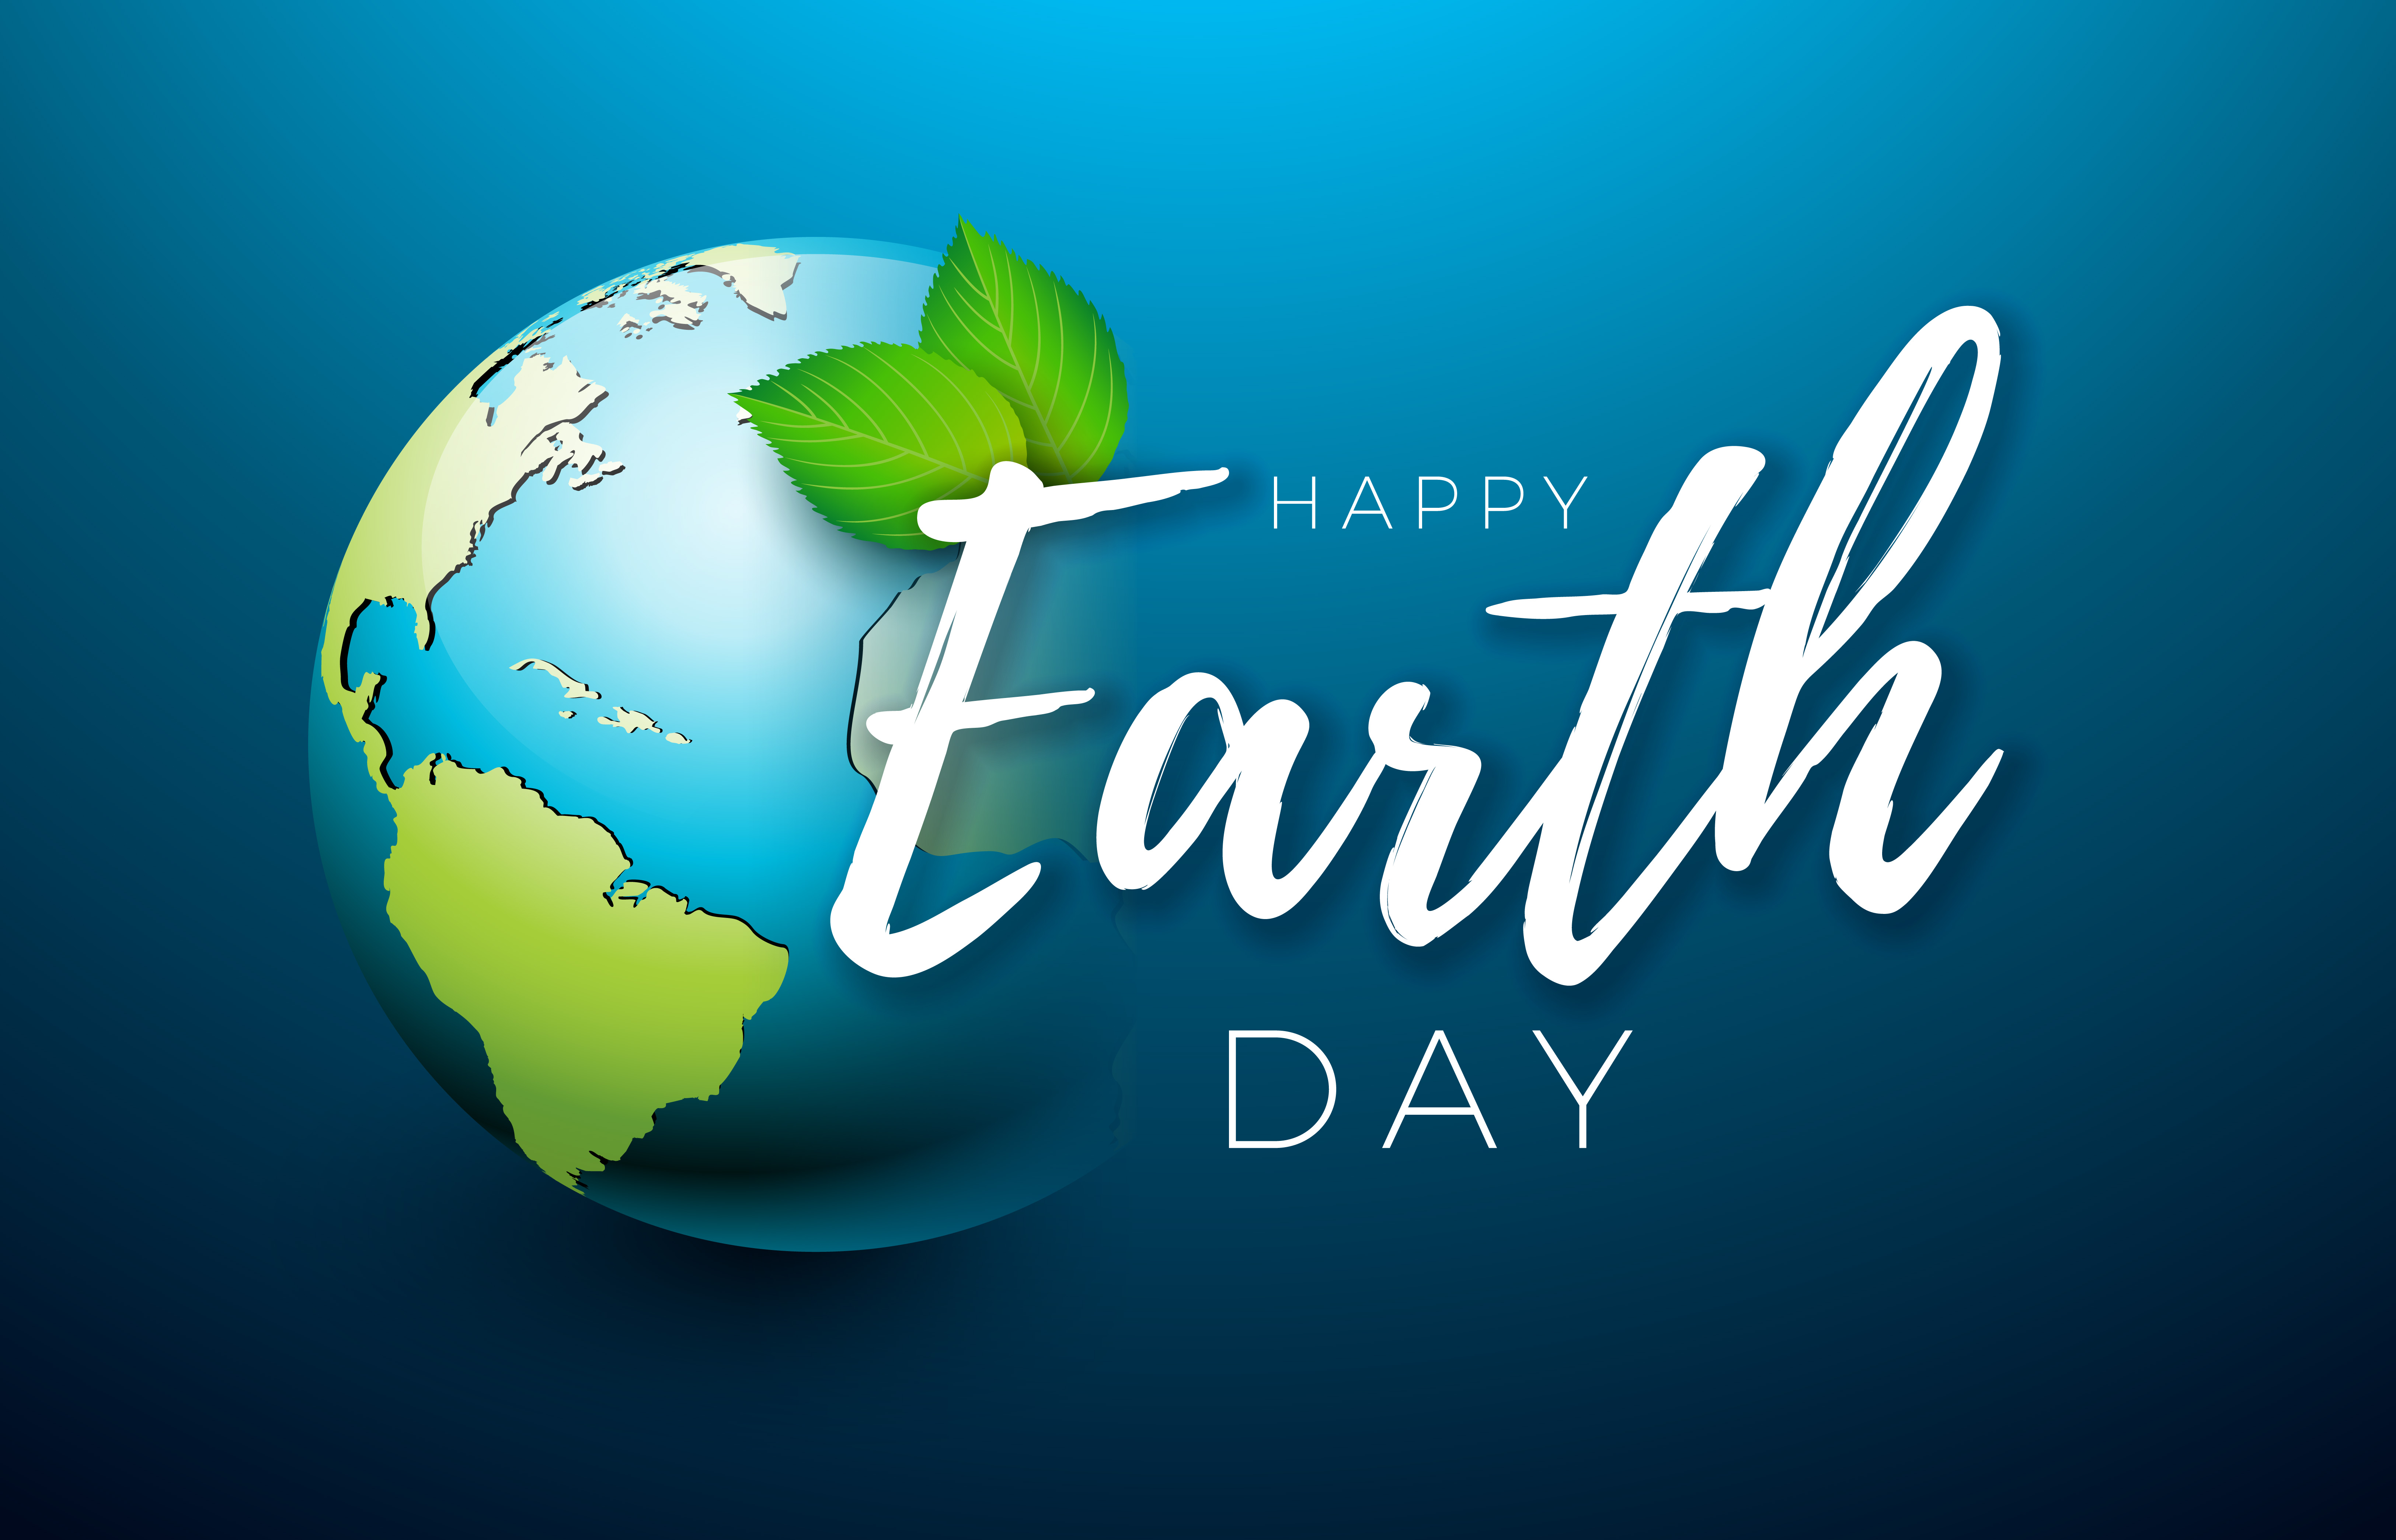 Earth Day: Let’s invest in our planet!